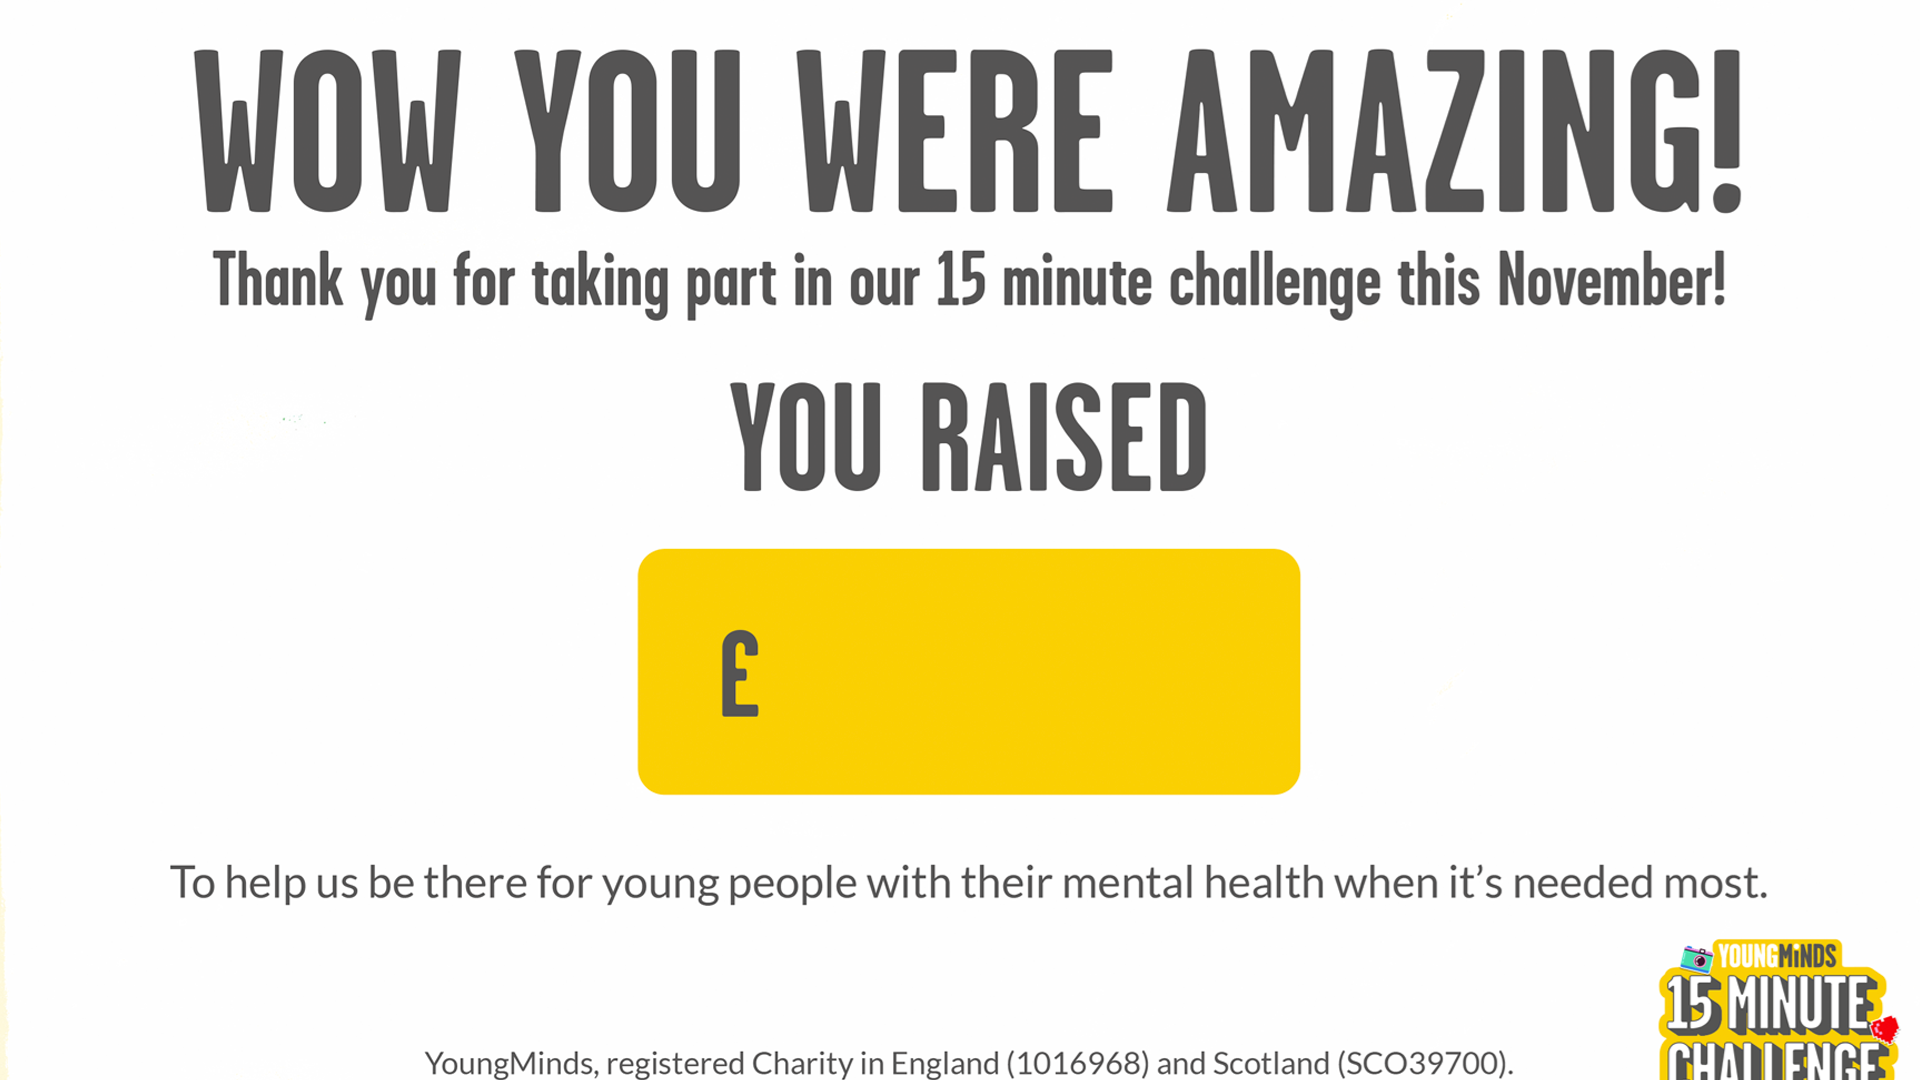 Wow, you were amazing! You raised blank pounds.